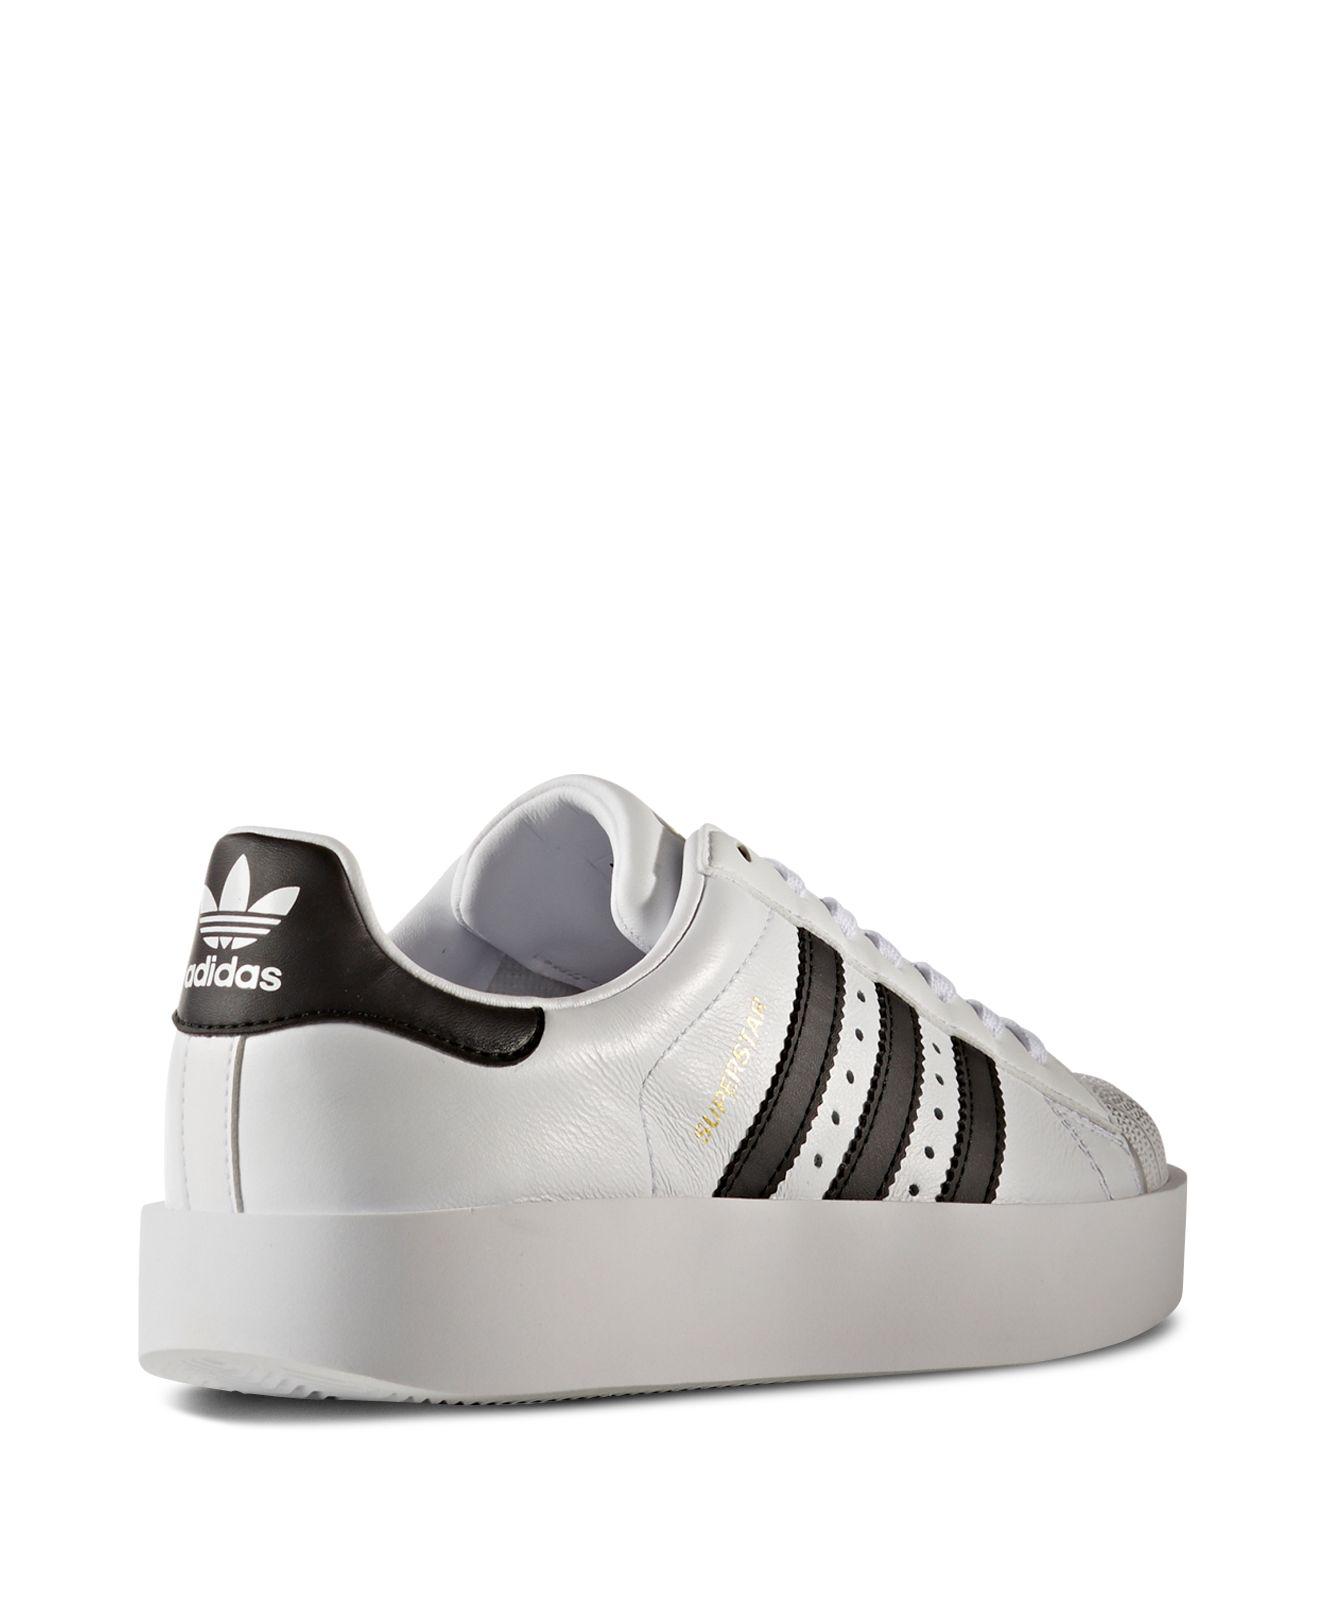 adidas Women's Superstar Bold Platform Lace Up Sneakers in White/Black ( White) | Lyst